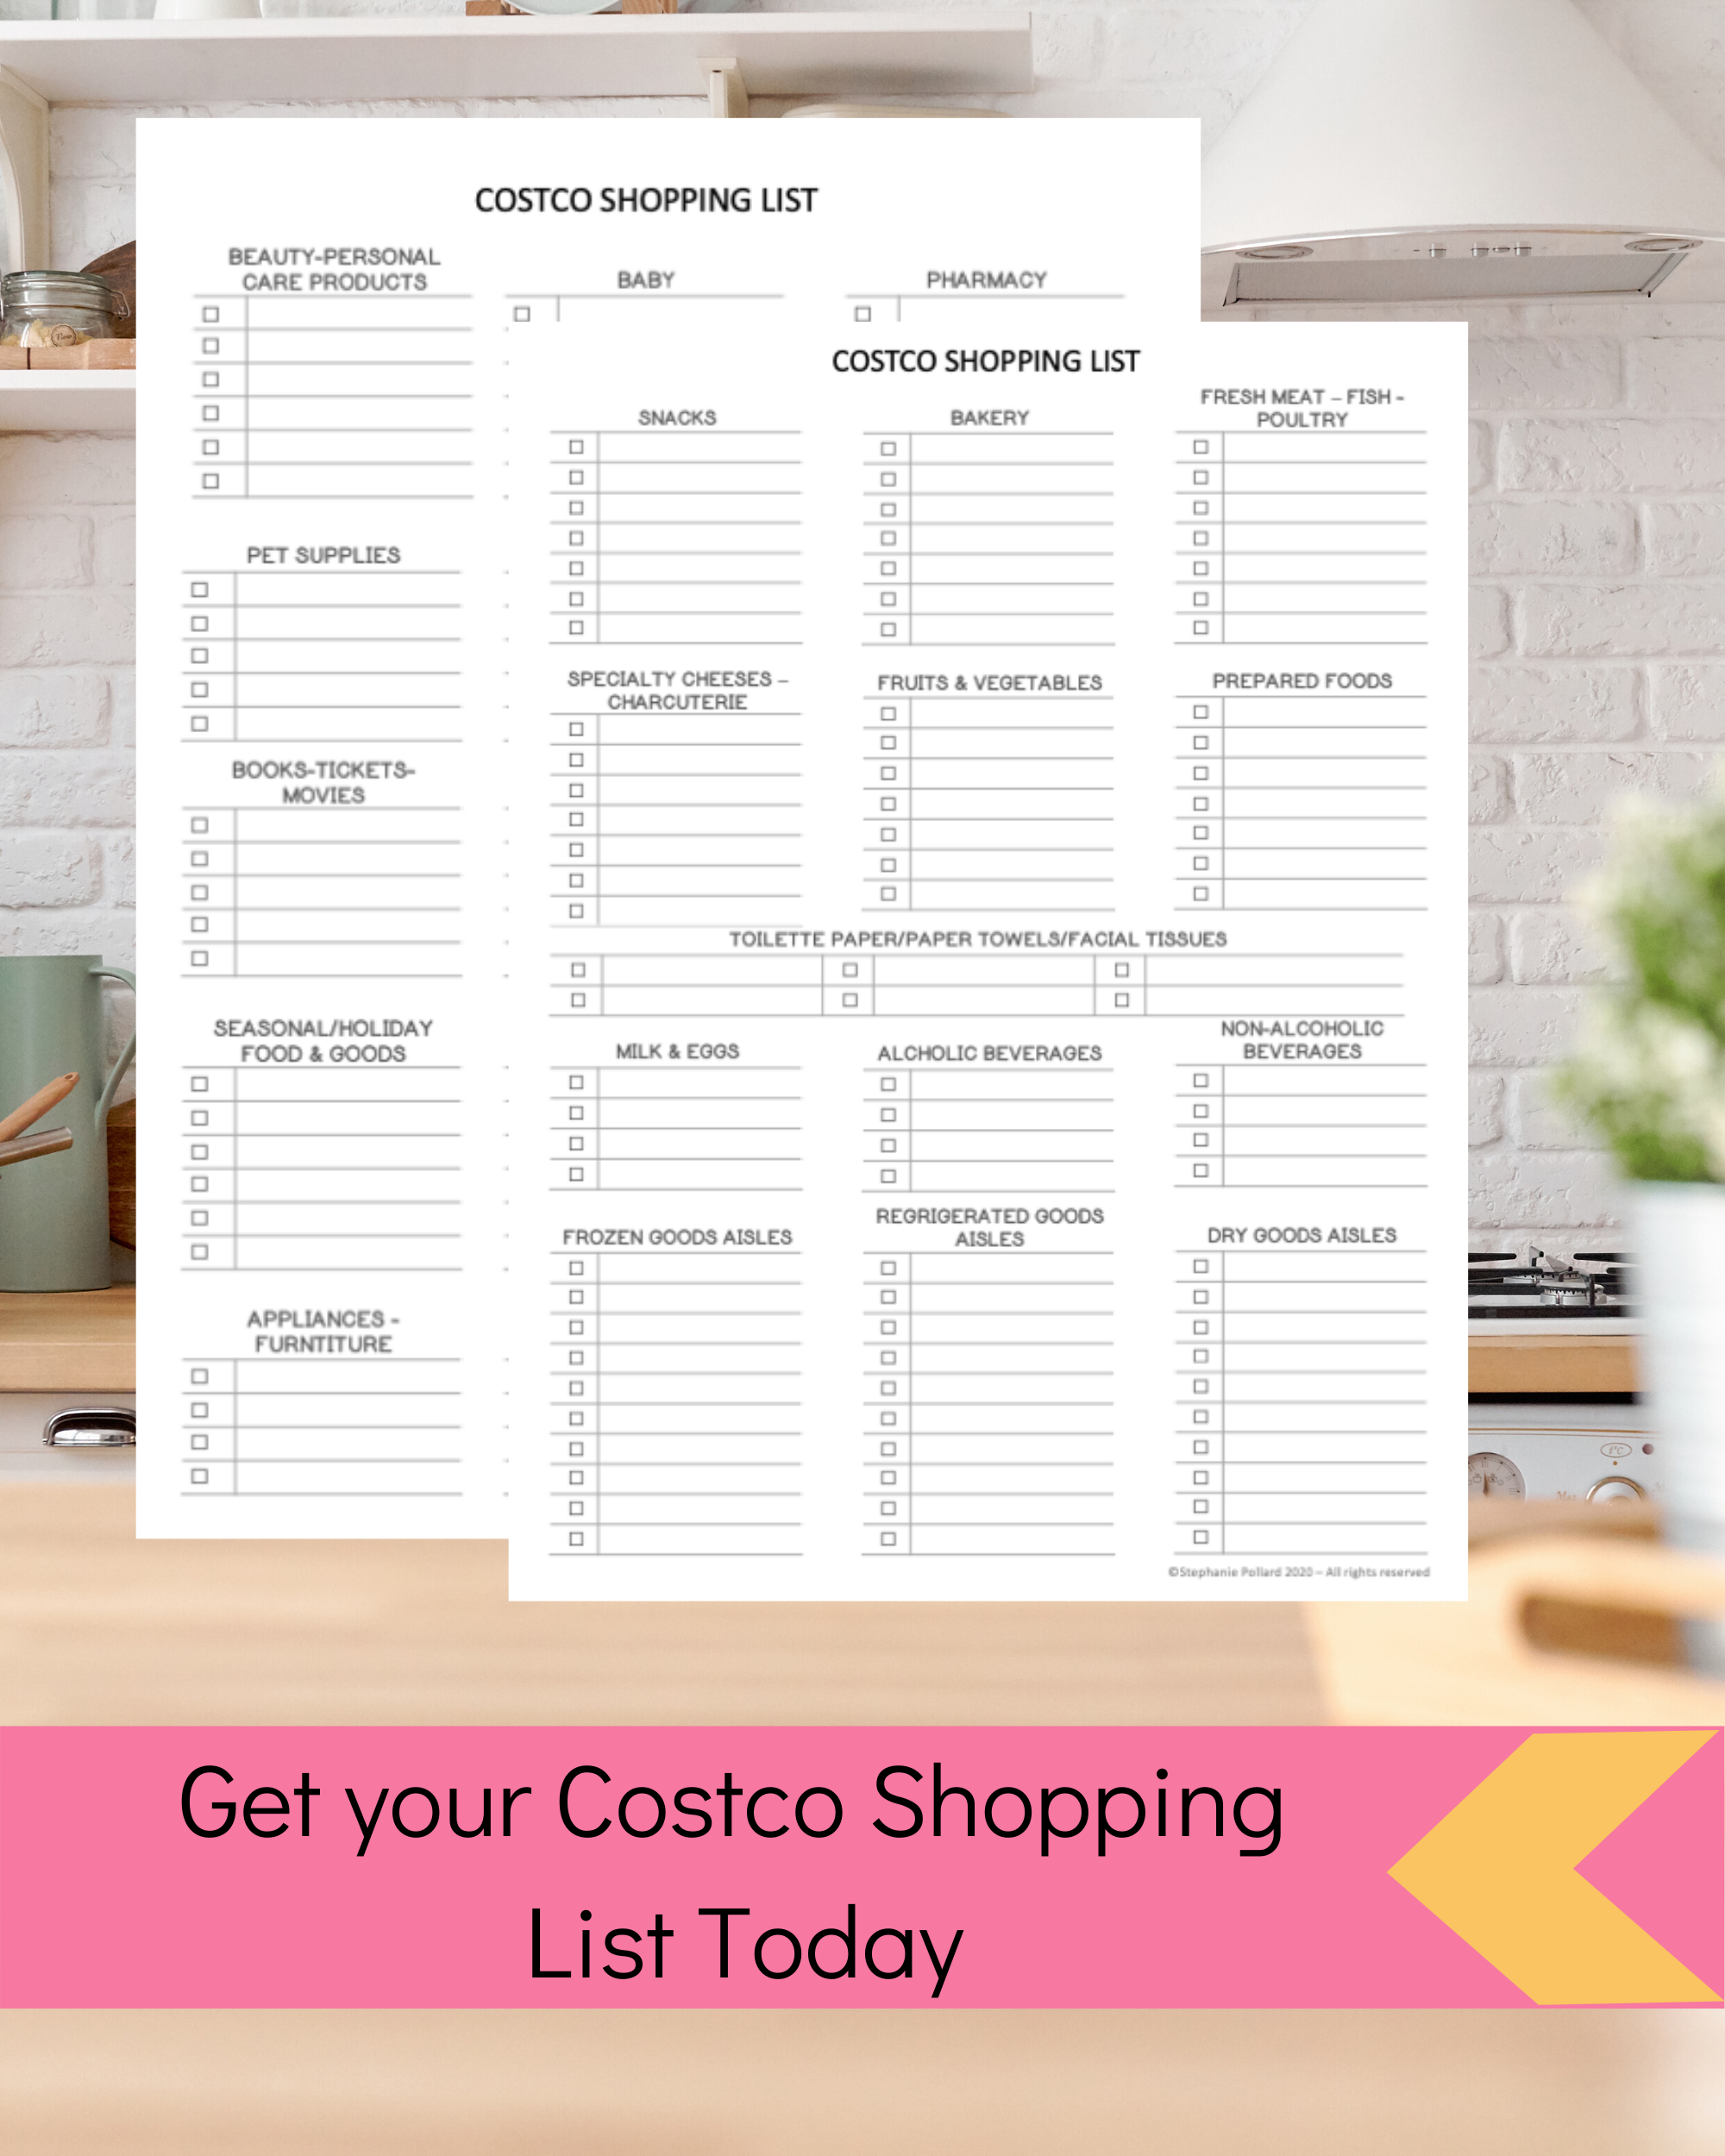 Costco Shopping List Grocery List Printable In 2020 